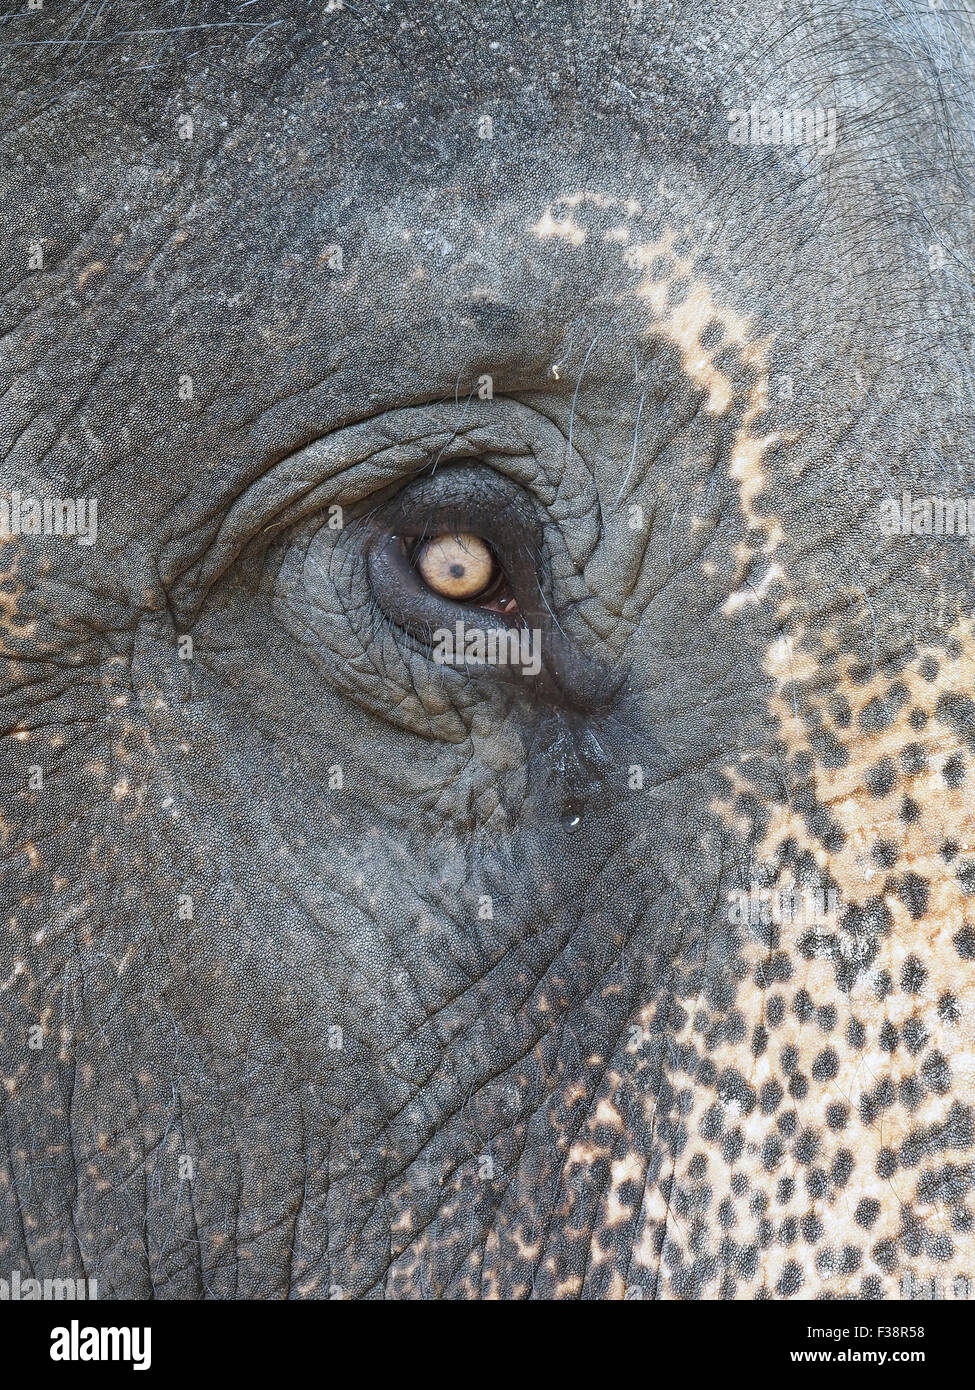 Close-up view of an elephant's eye Stock Photo